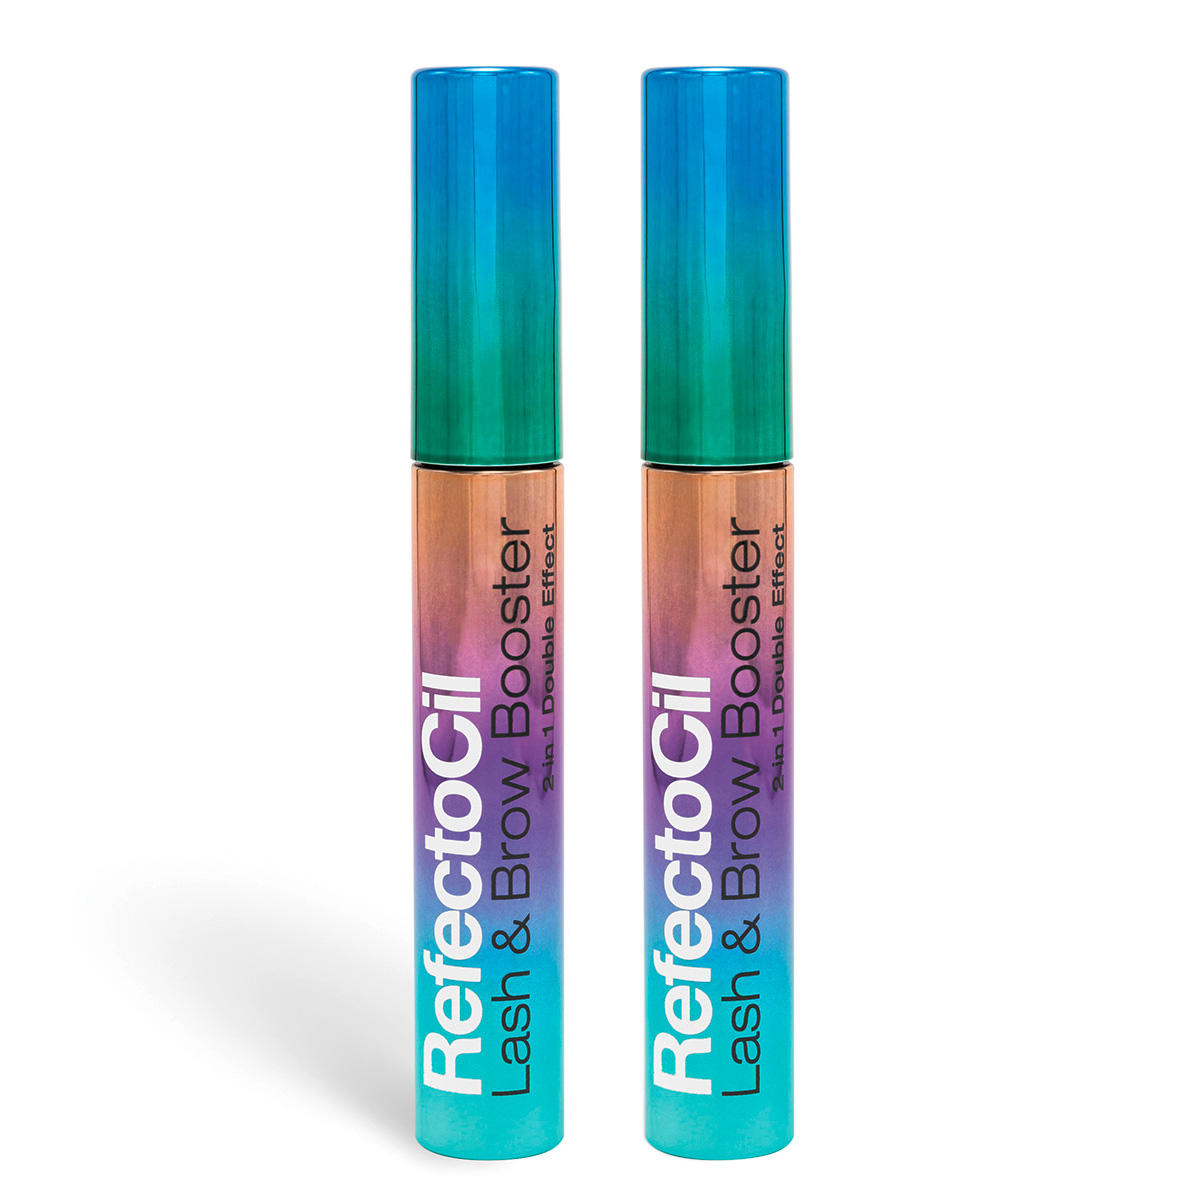 RefectoCil Lash and Brow Booster Duo-Set 2 x 6 ml - 1